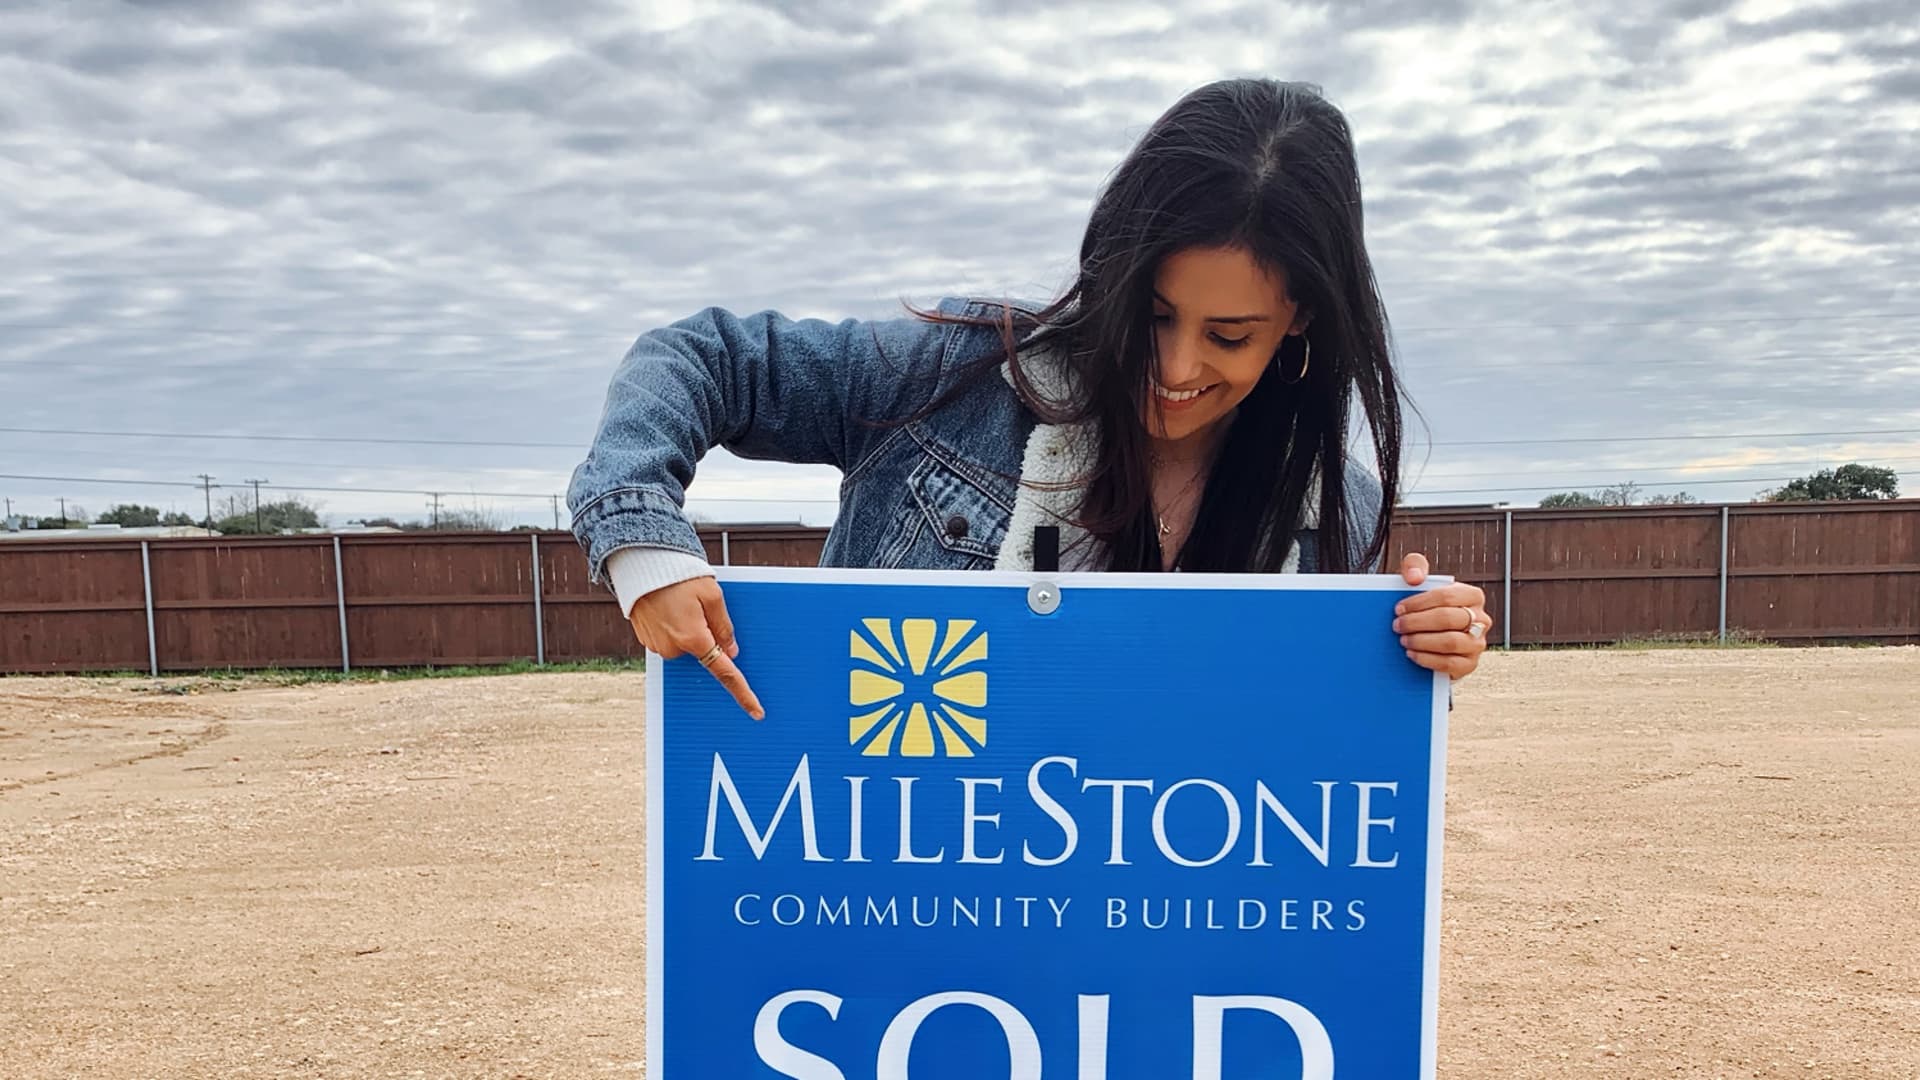 Contreras purchased her first home in early 2020. It will be custom built from the ground up.